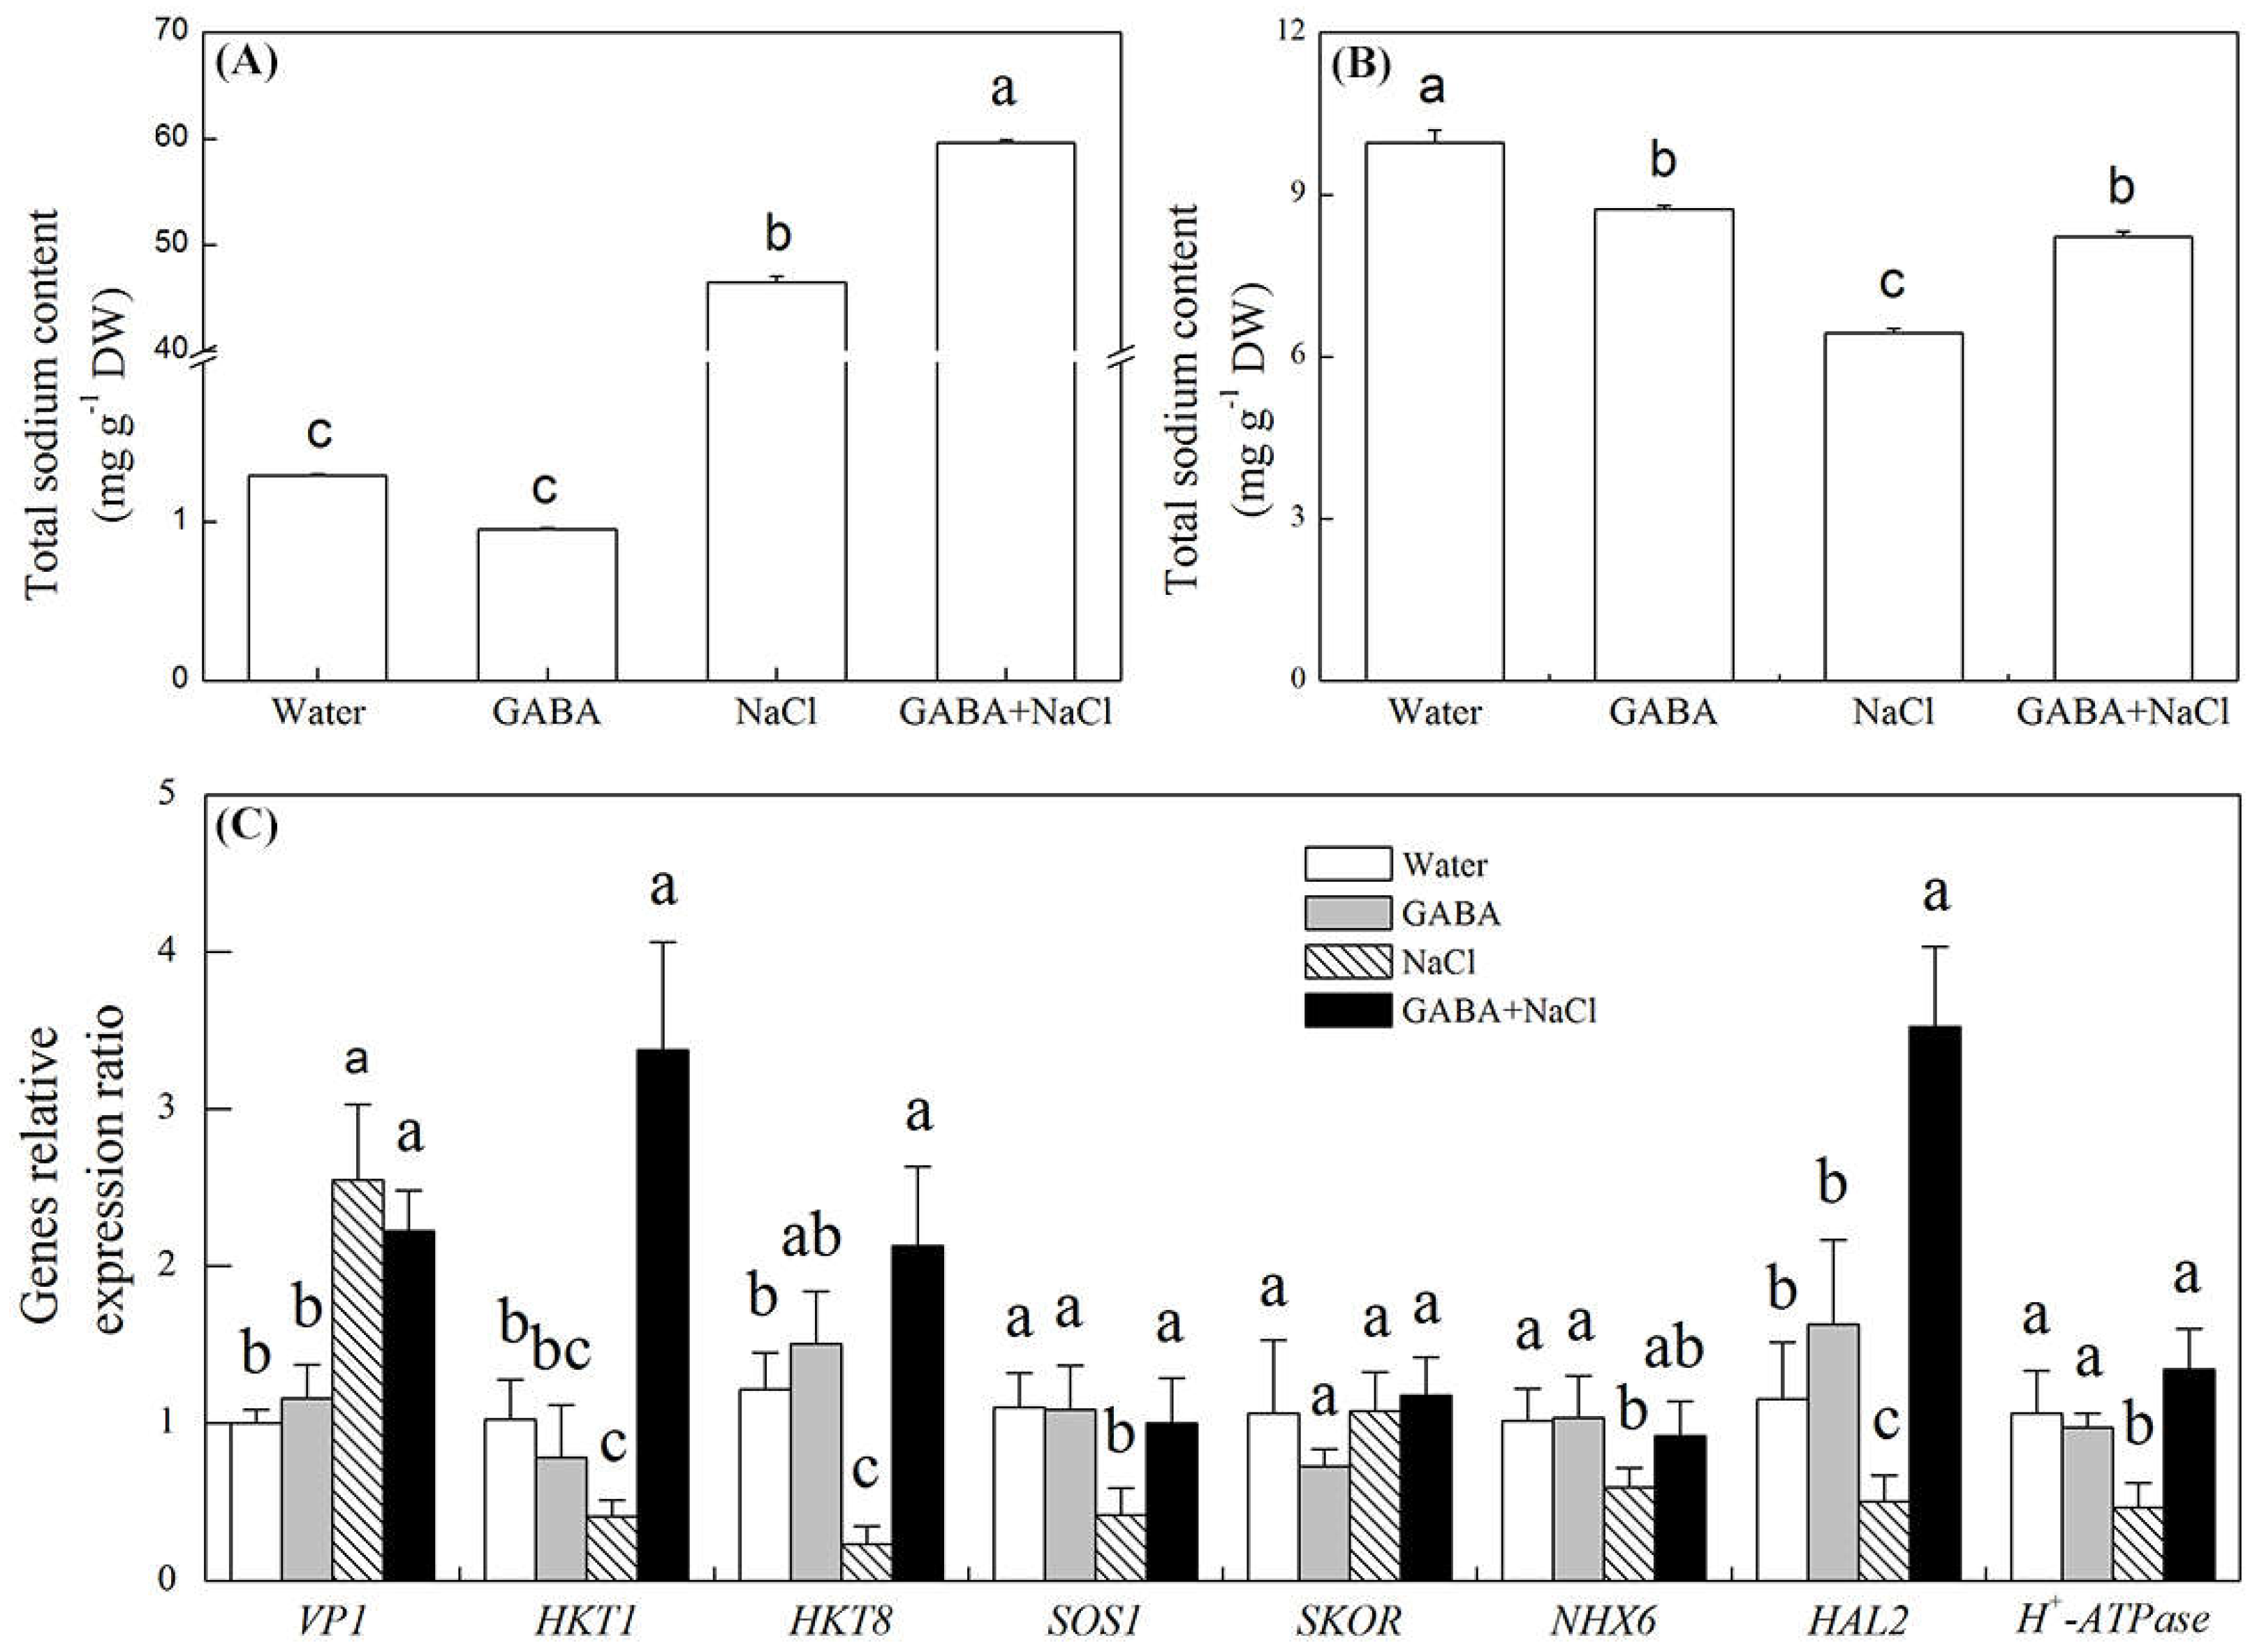 IJMS | Free Full-Text | The γ-Aminobutyric Acid (GABA) Alleviates Salt  Stress Damage during Seeds Germination of White Clover Associated with  Na+/K+ Transportation, Dehydrins Accumulation, and Stress-Related Genes  Expression in White Clover